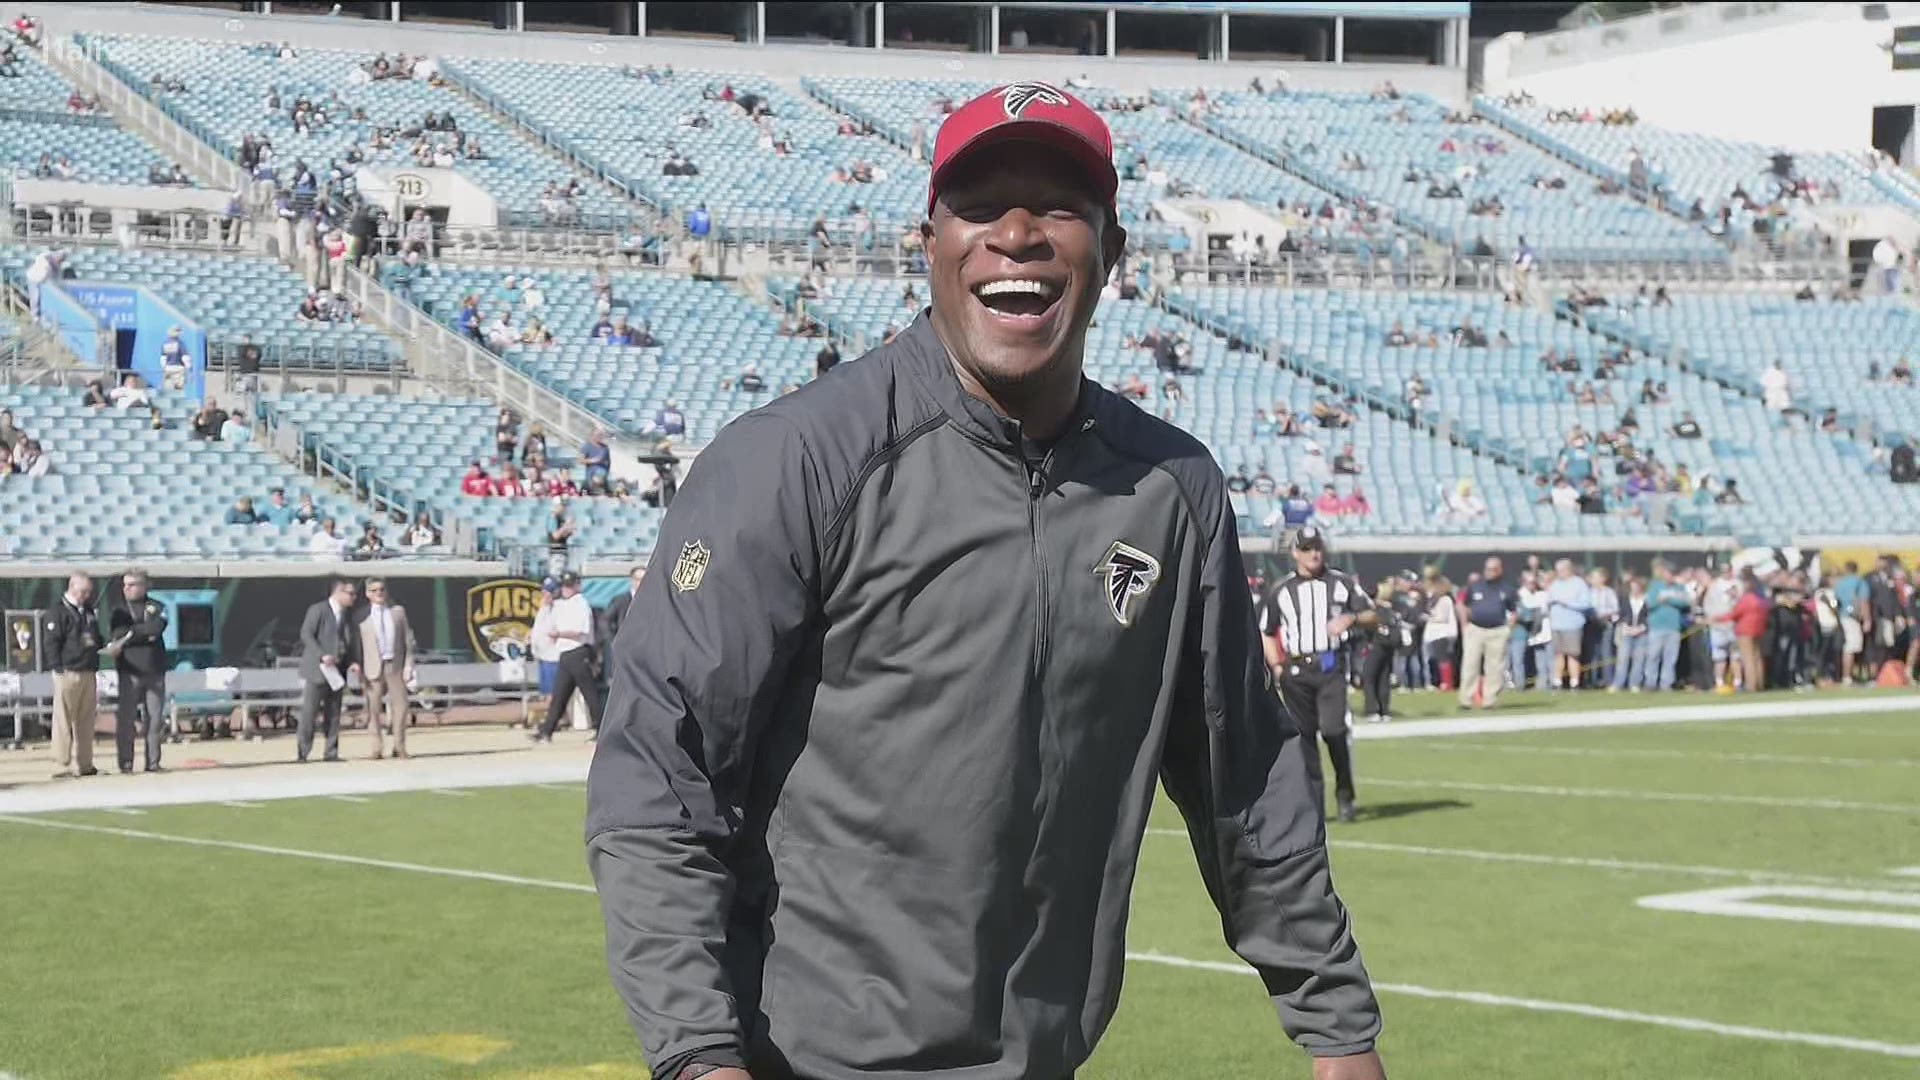 Morris is someone who is very familiar with the Falcons, having spent six seasons with Atlanta from 2015 to 2020 in several different coaching roles.